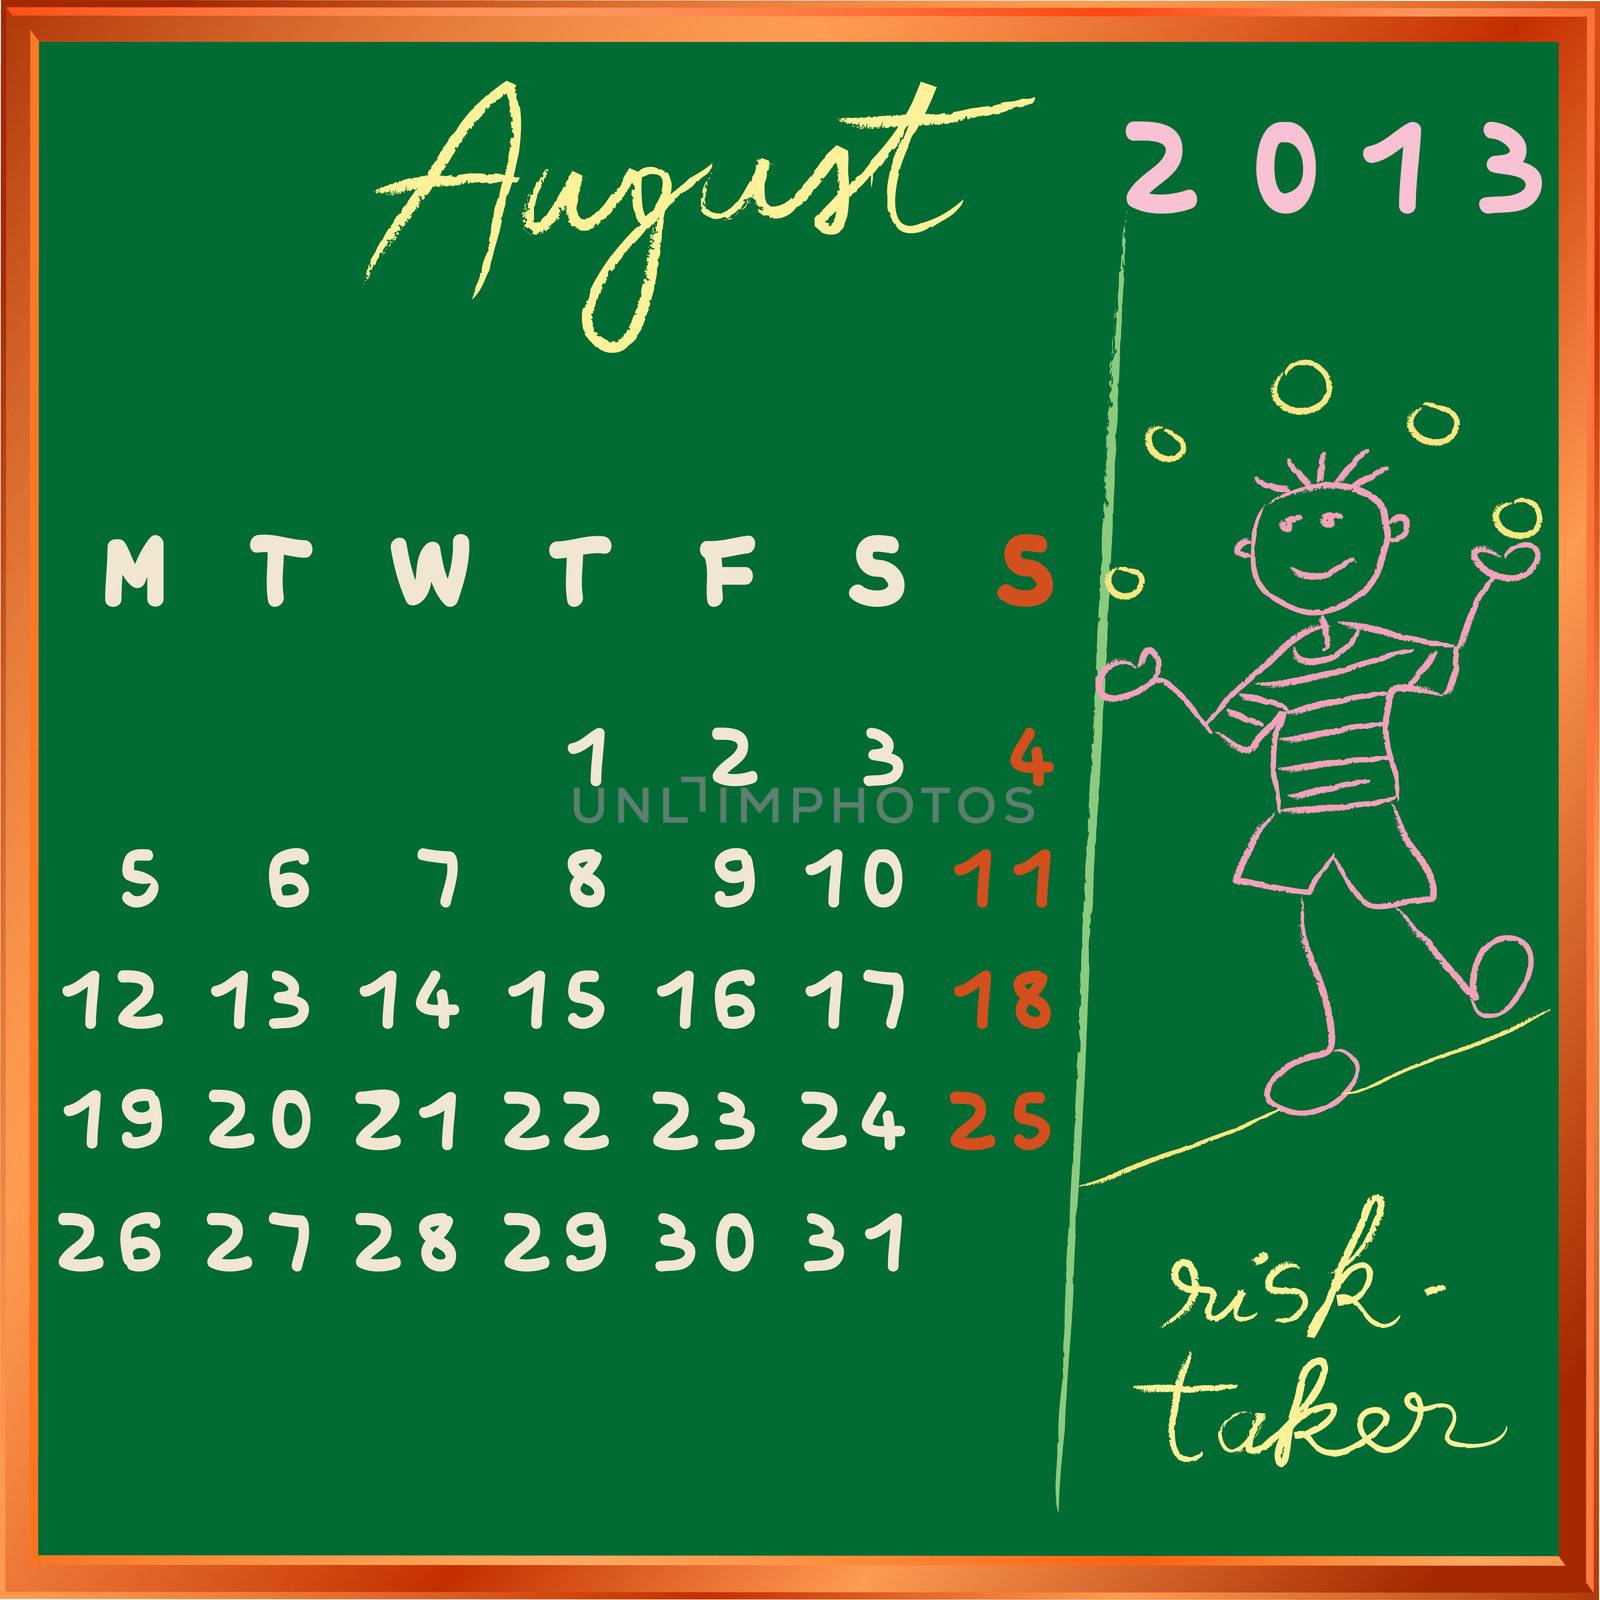 2013 calendar on a chalkboard, august design with the risk taker student profile for international schools